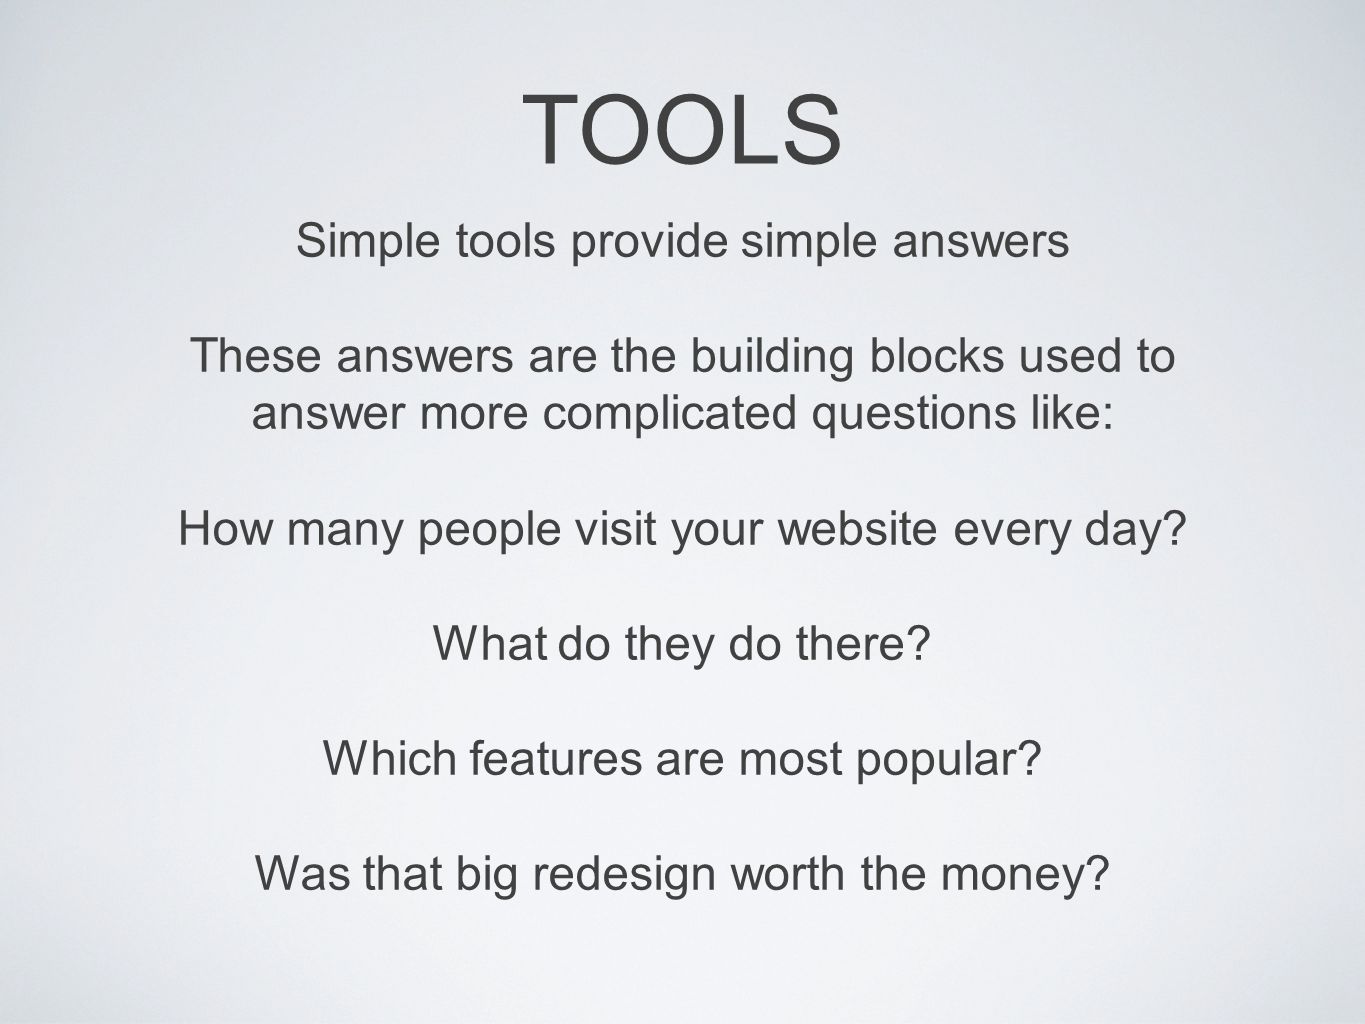 Simple tools provide simple answers These answers are the building blocks used to answer more complicated questions like: How many people visit your website every day.